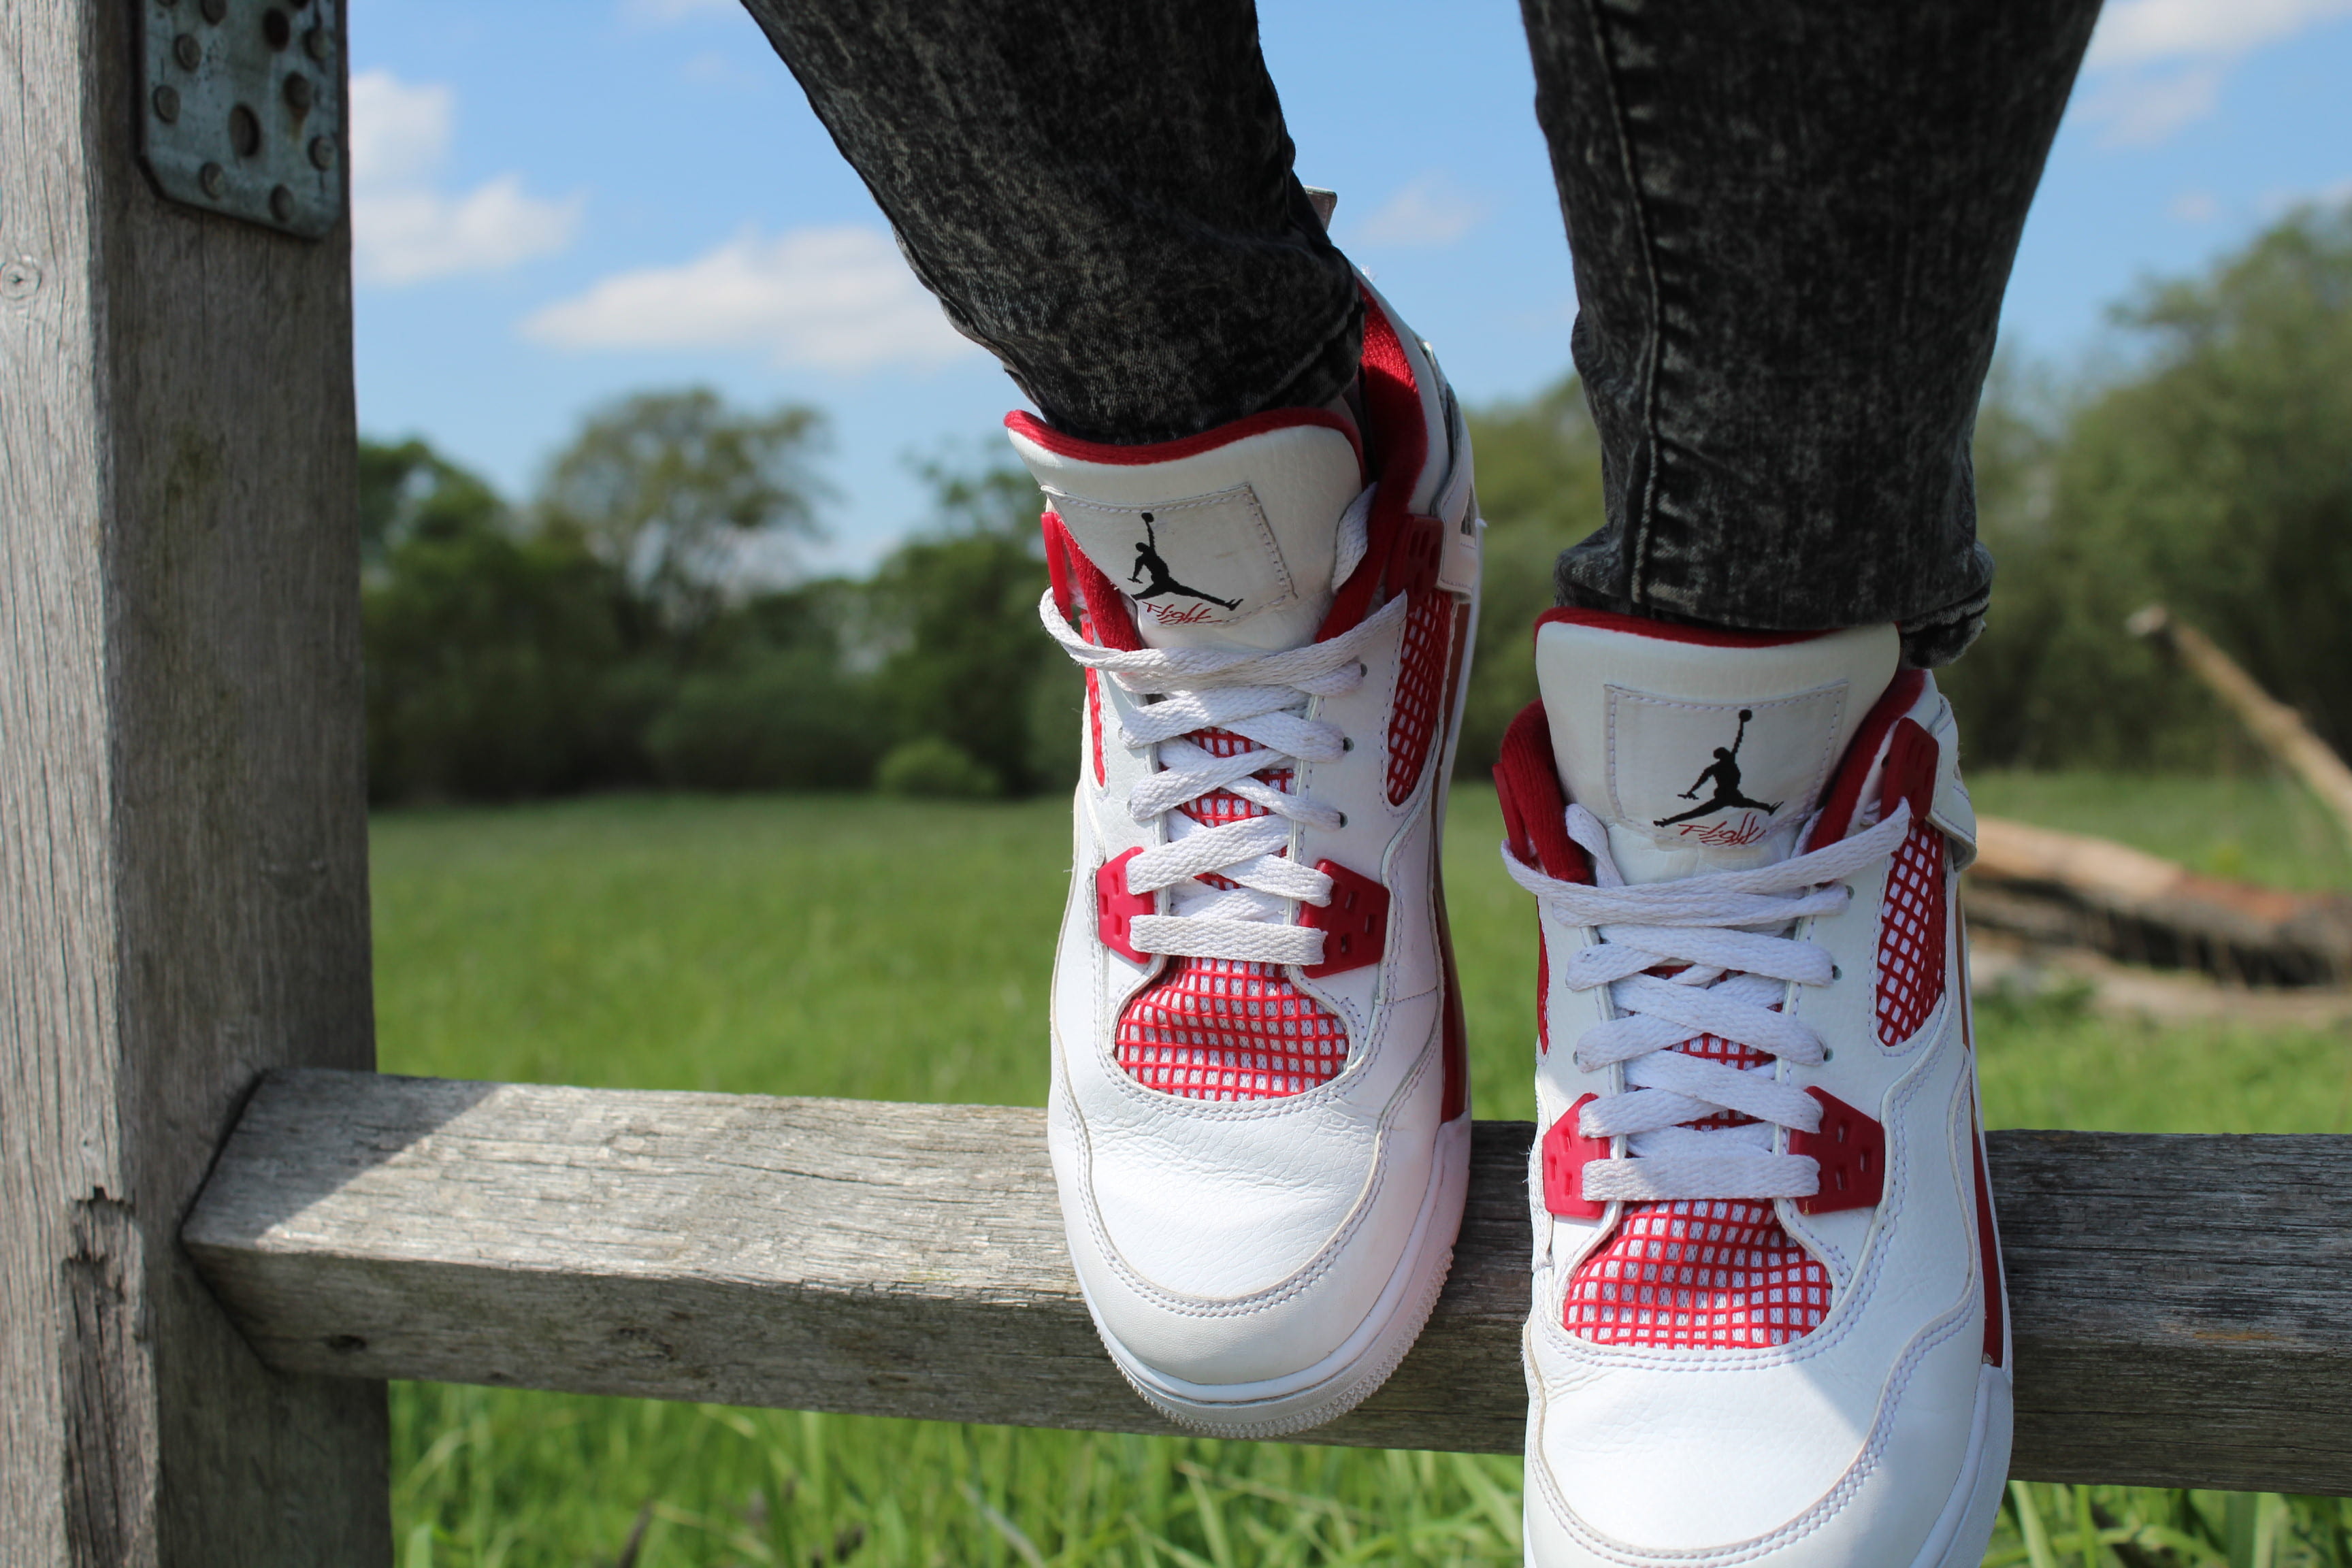 person wearing pair of red-and-white Air Jordan shoes, person wearing white-and-red Air Jordan Flight shoes